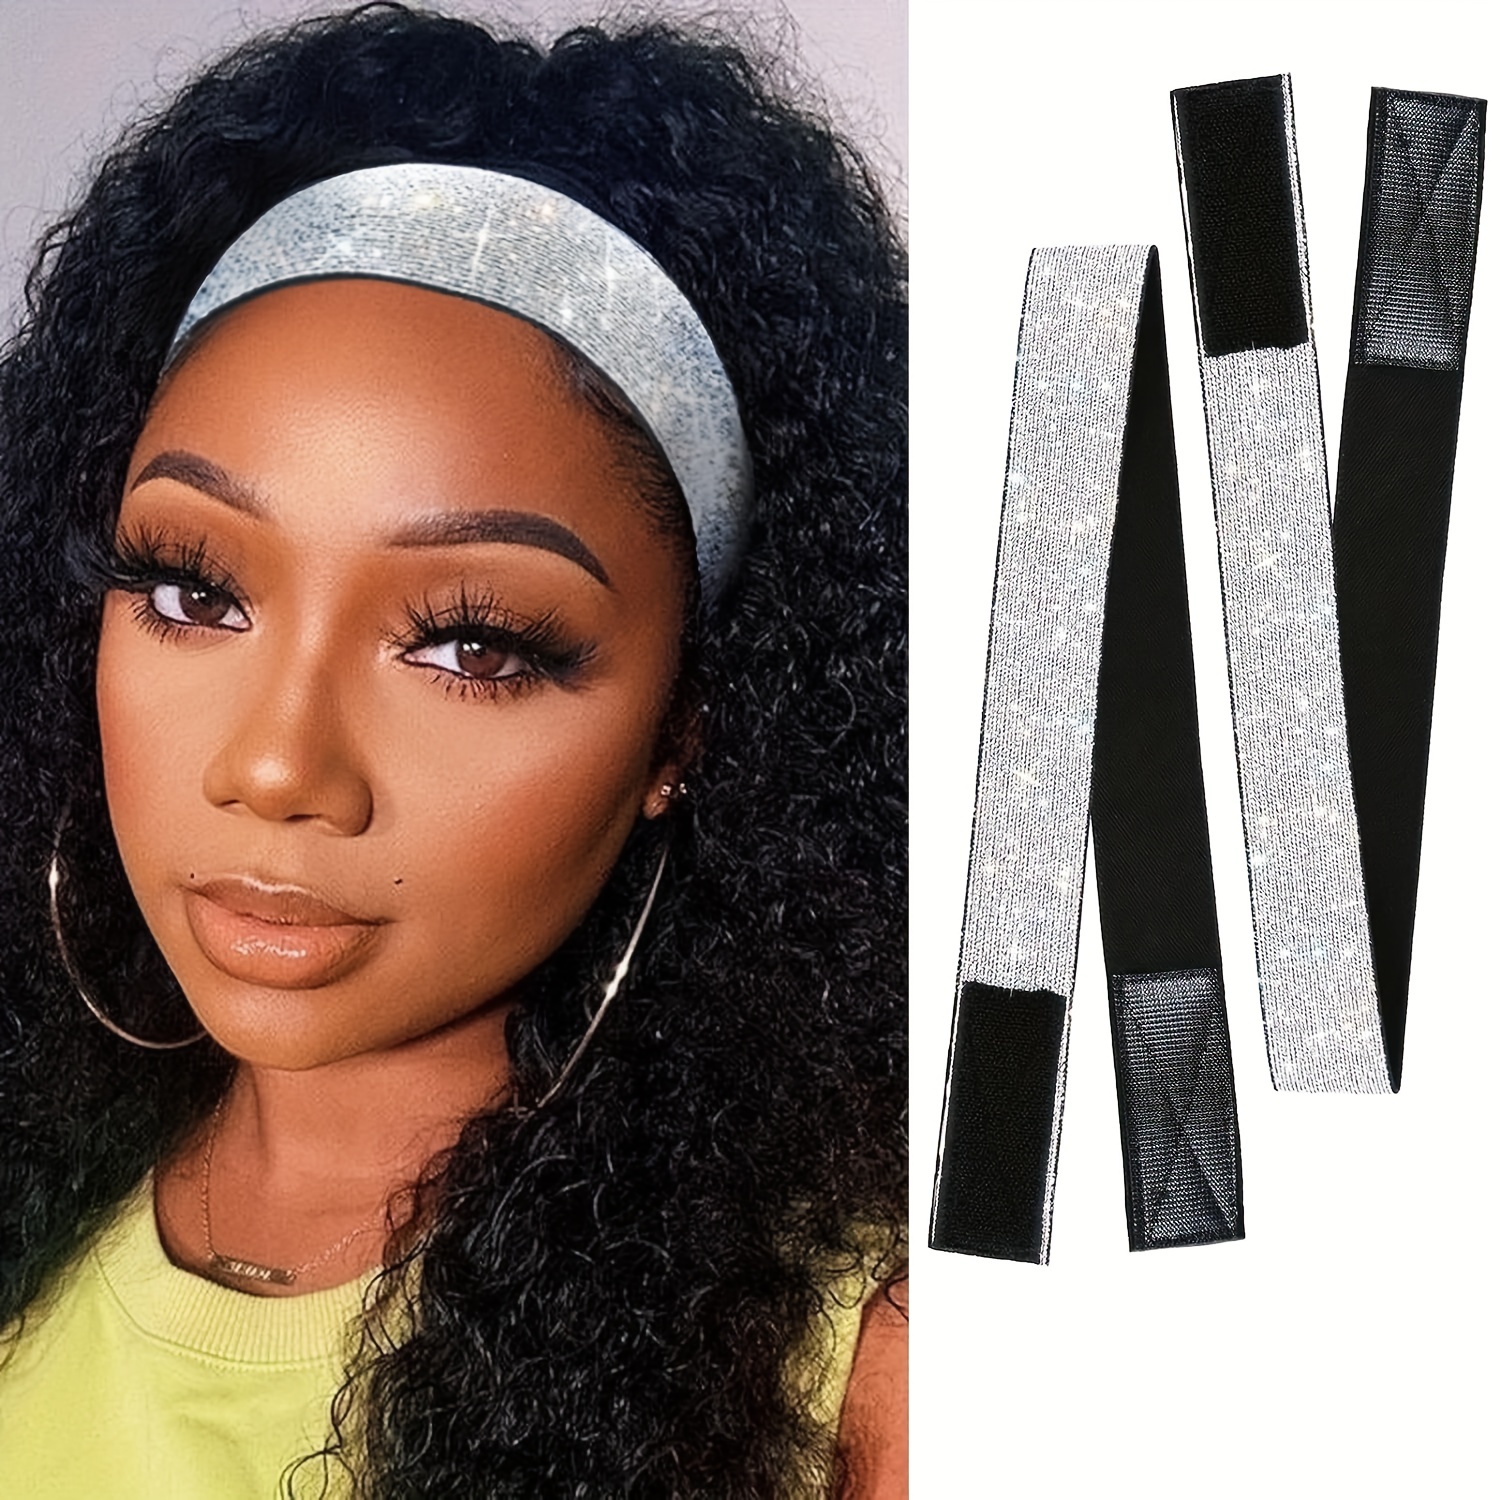 Wig band,Elastic Bands for Wig,Lace Front Wig Edge Band for Women,Lace  Melting Band for Wigs and Baby Hair,Wig Bands for Keeping Wigs in Place,Wig  Grip Headband Edge Wrap to Lay Edges